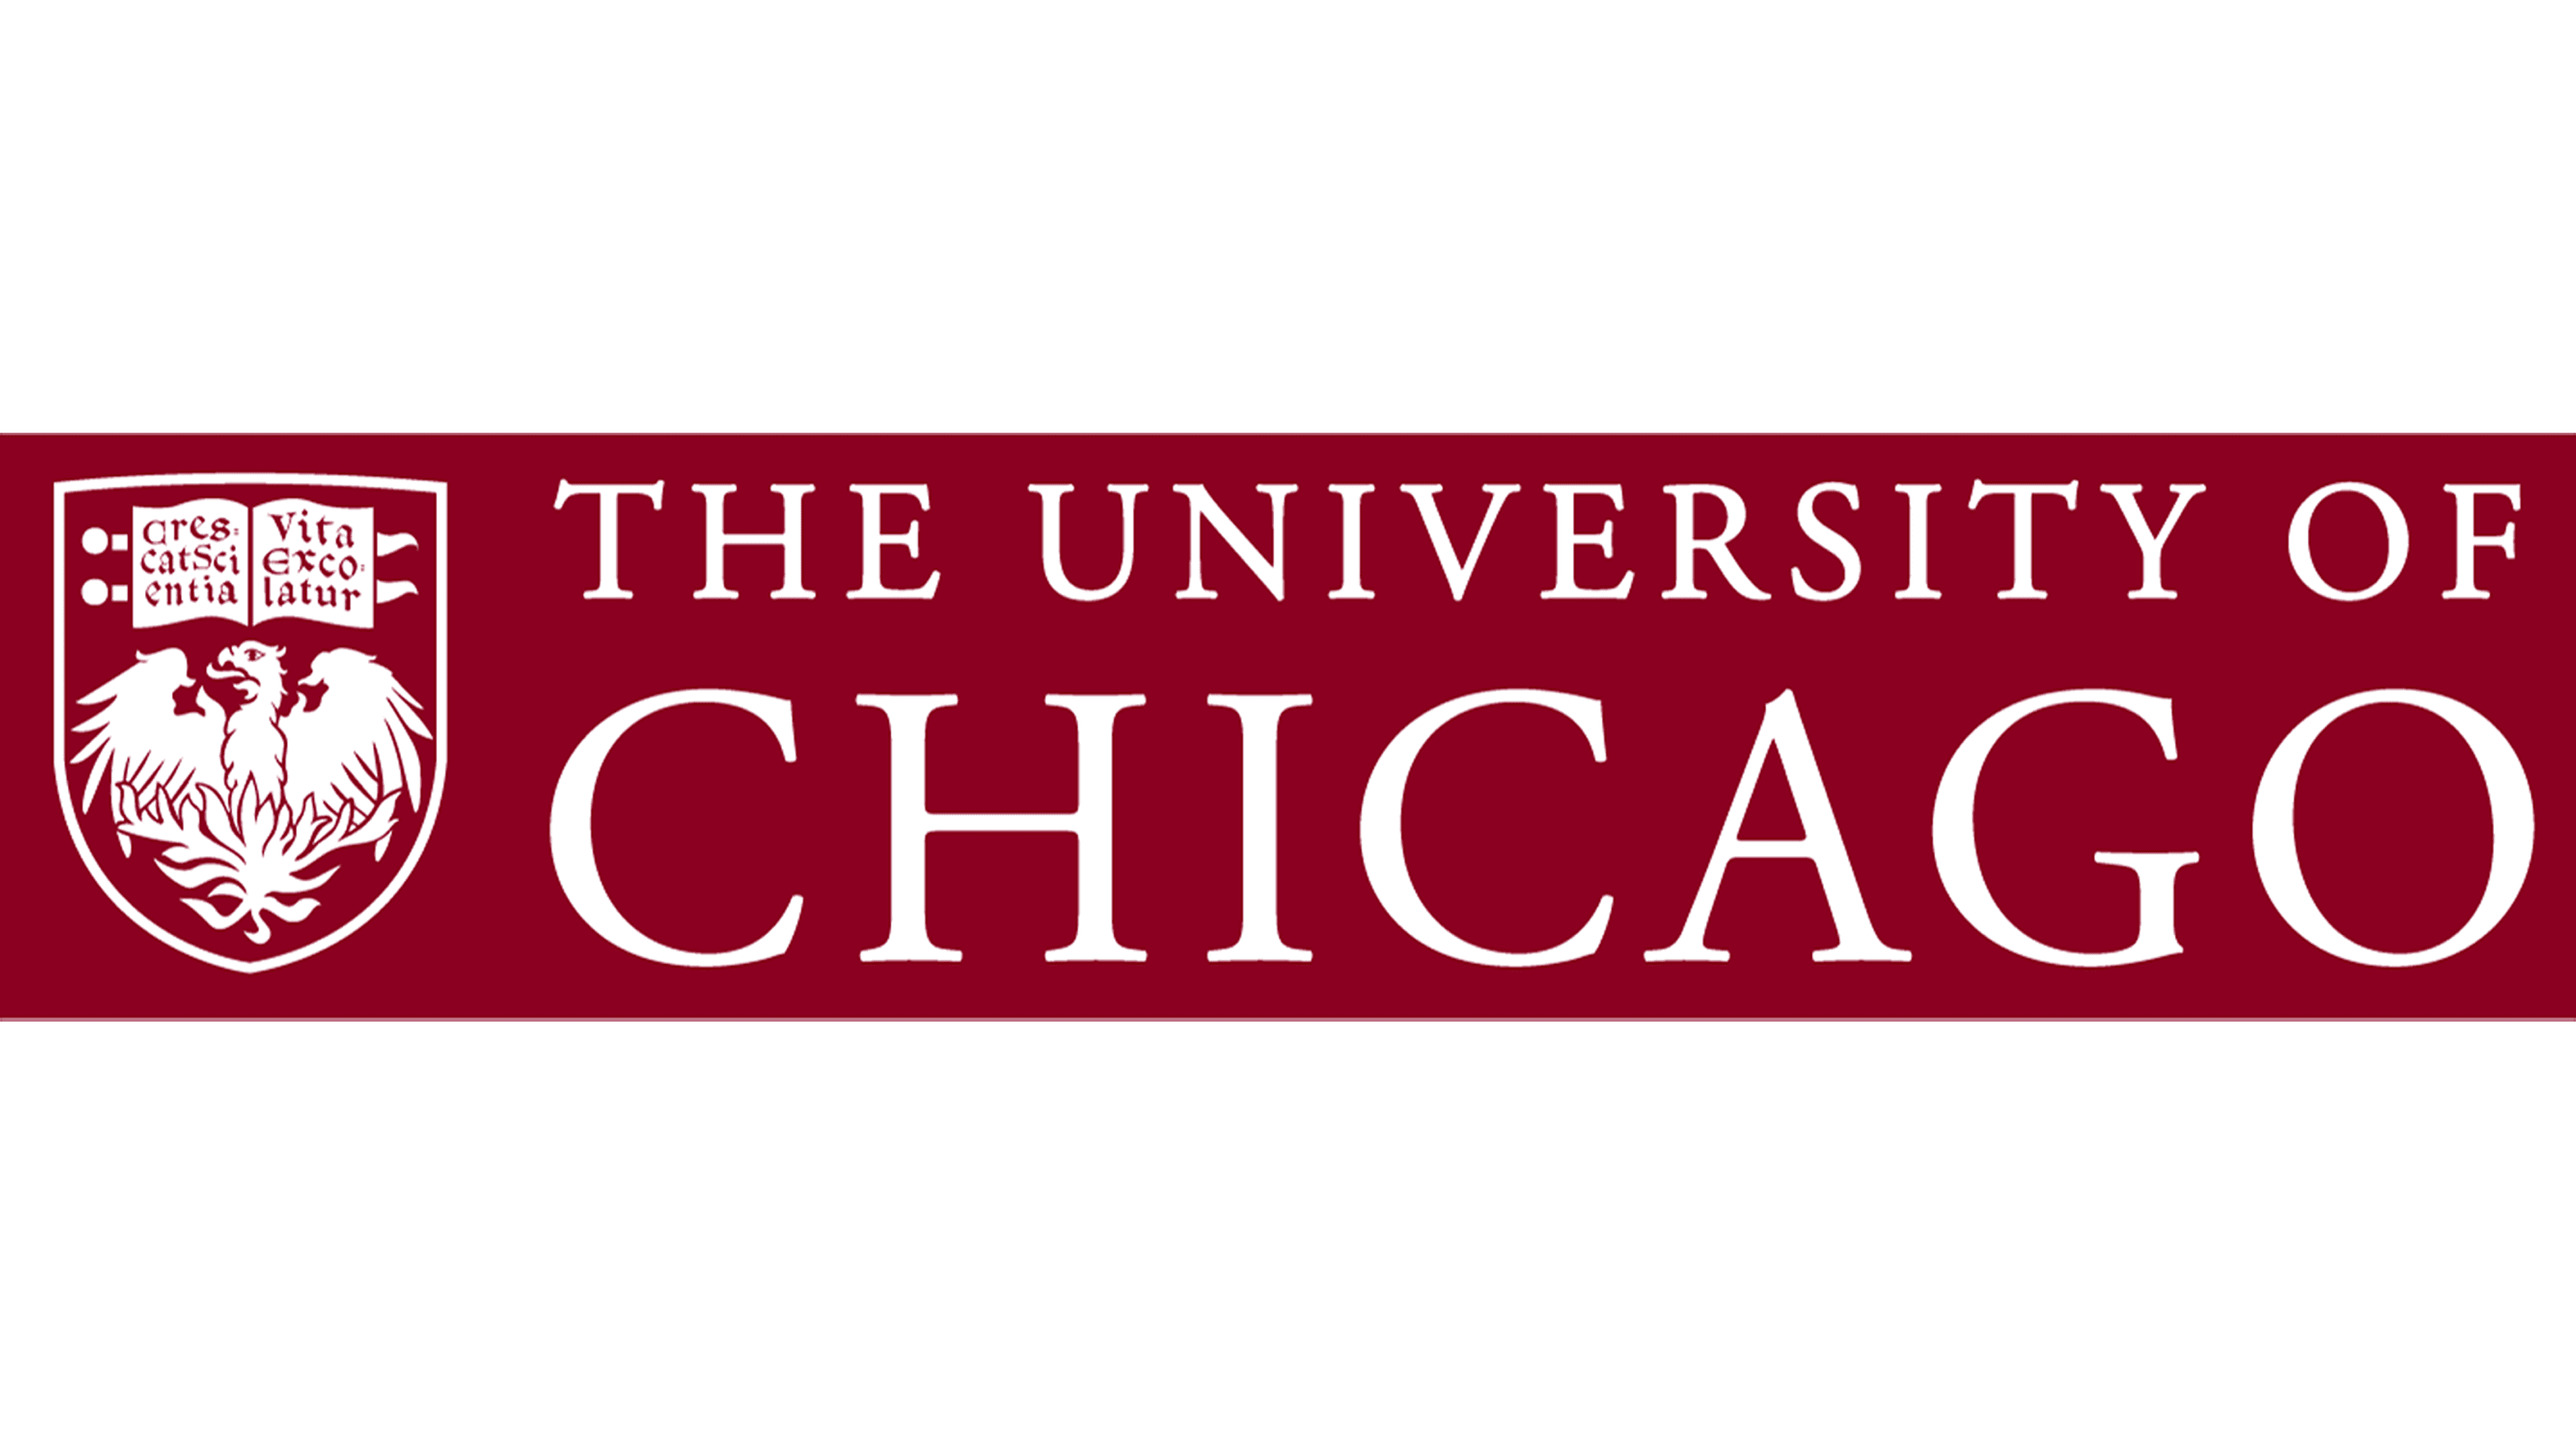 University of Chicago Logo and symbol, meaning, history, PNG, brand